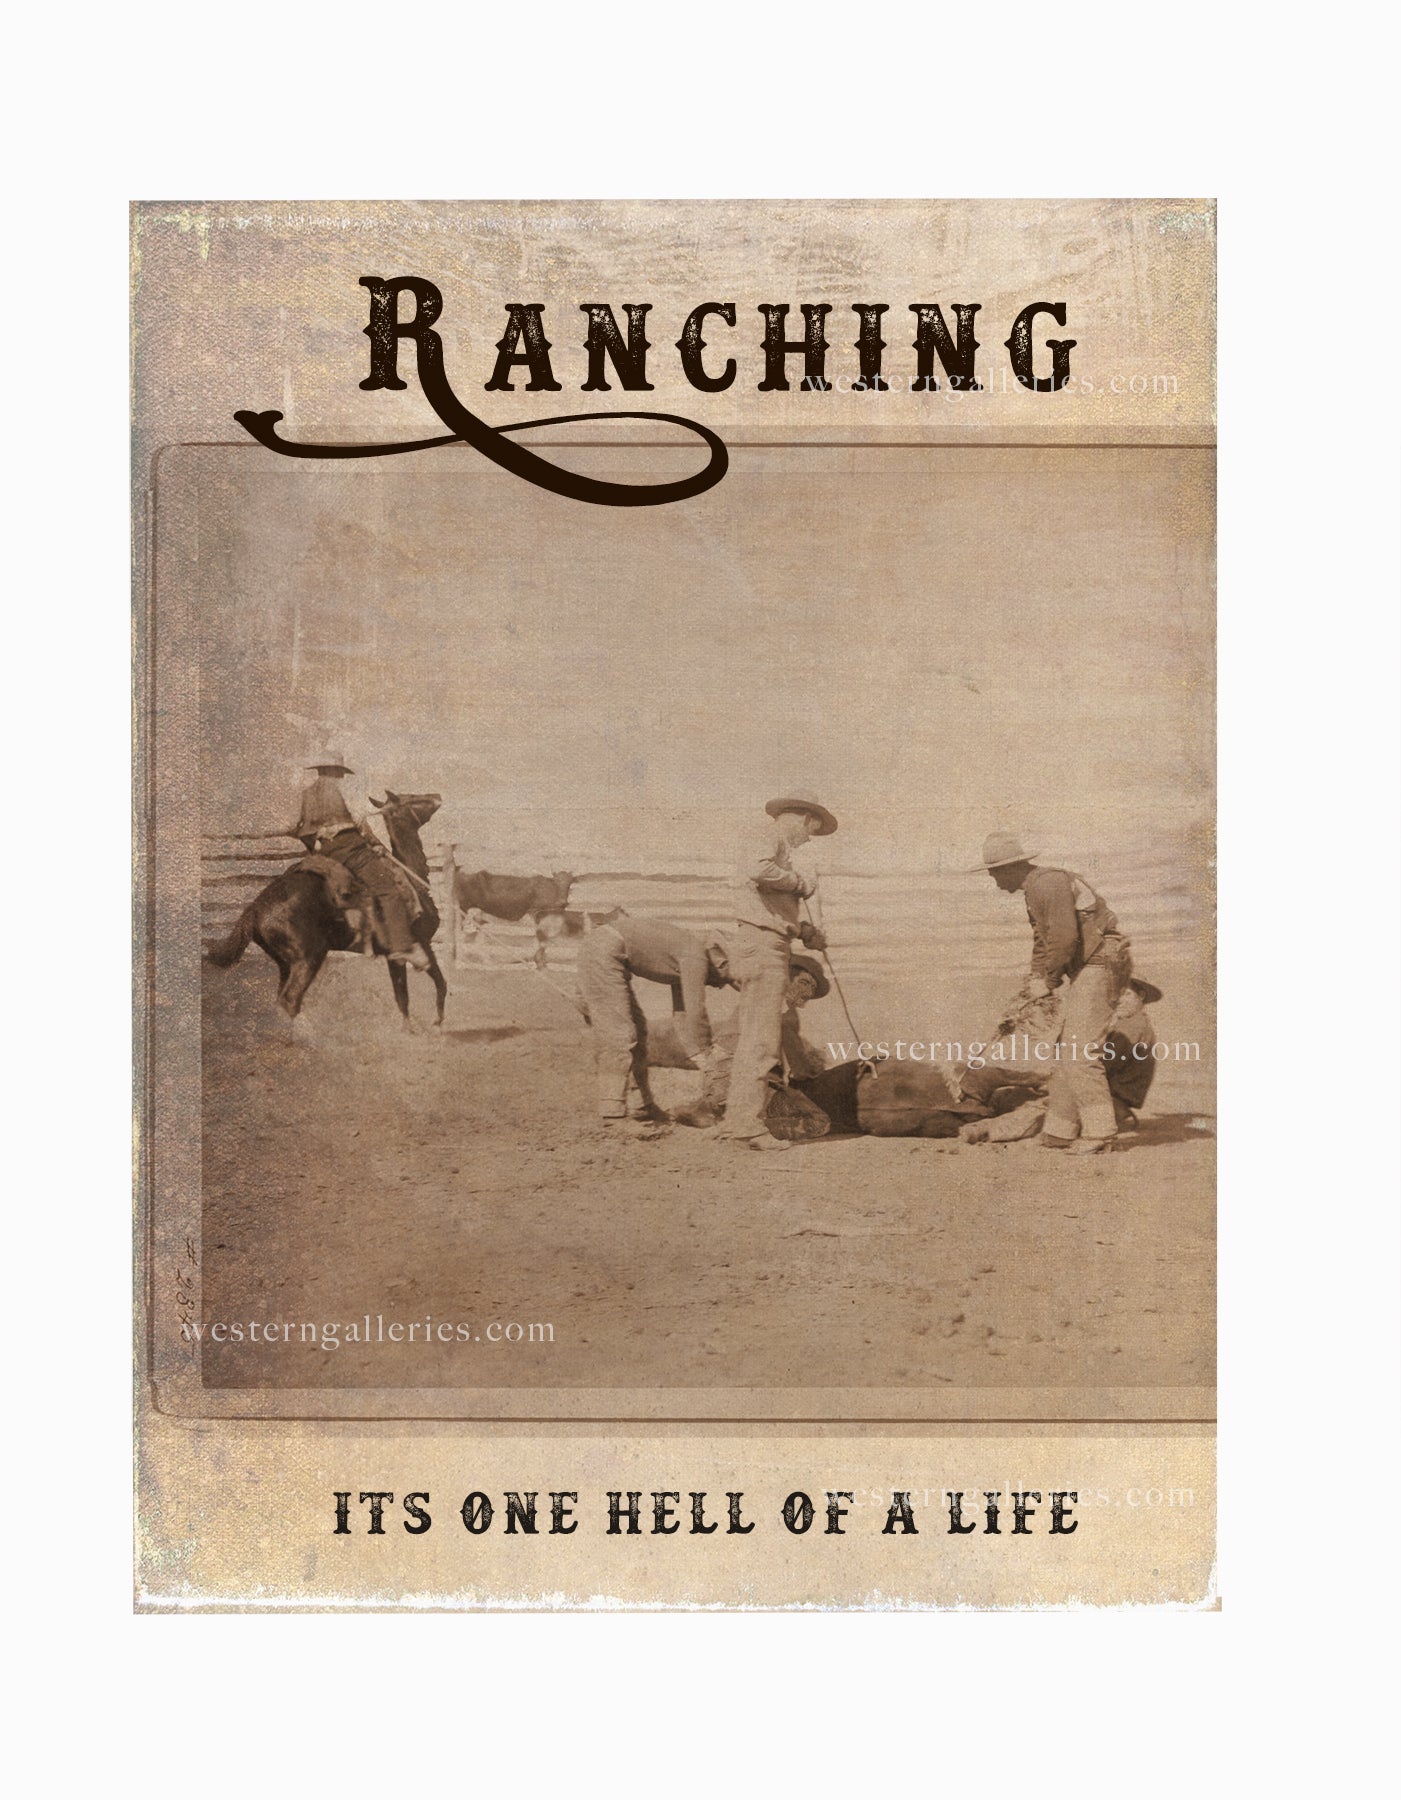 Ranching Its One Hell of a Life - Cards, Canvas, Prints, Decor